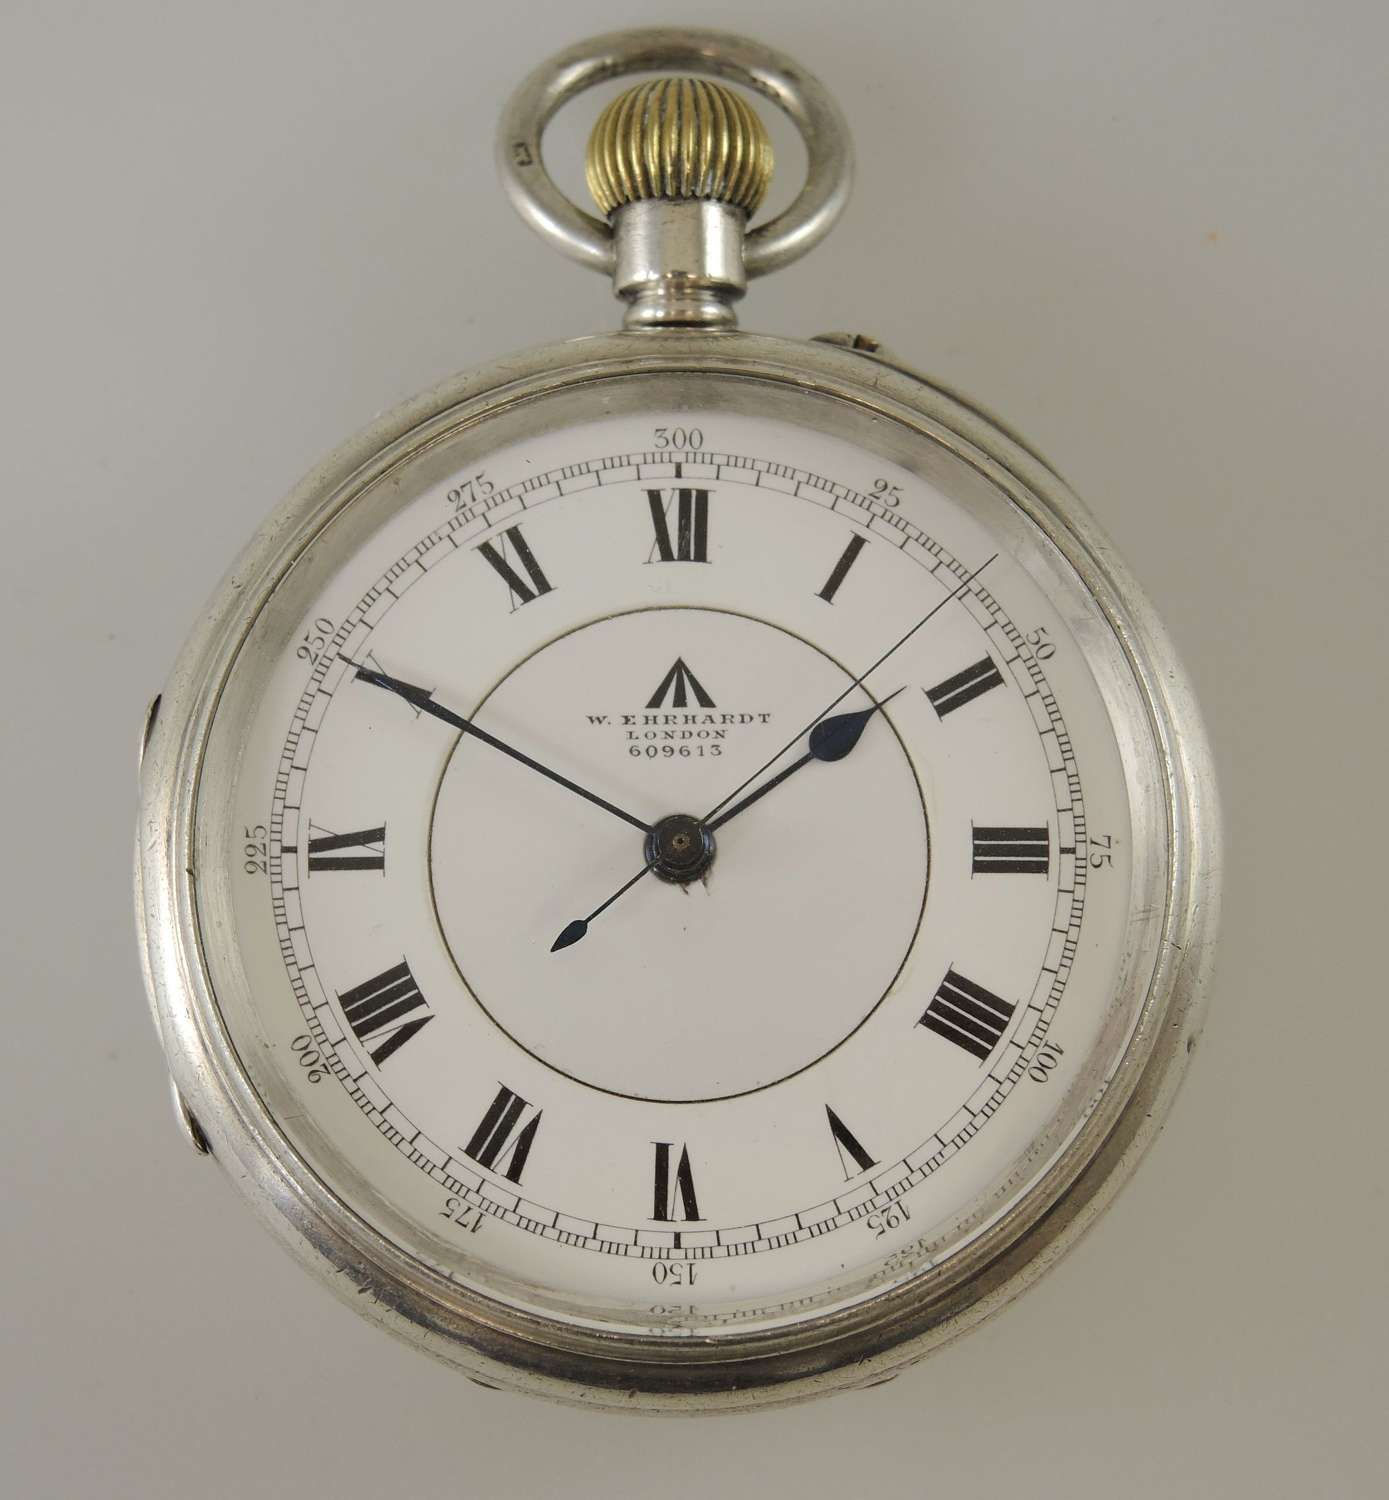 English silver Military pocket watch by W Erhardt pocket watches c1915